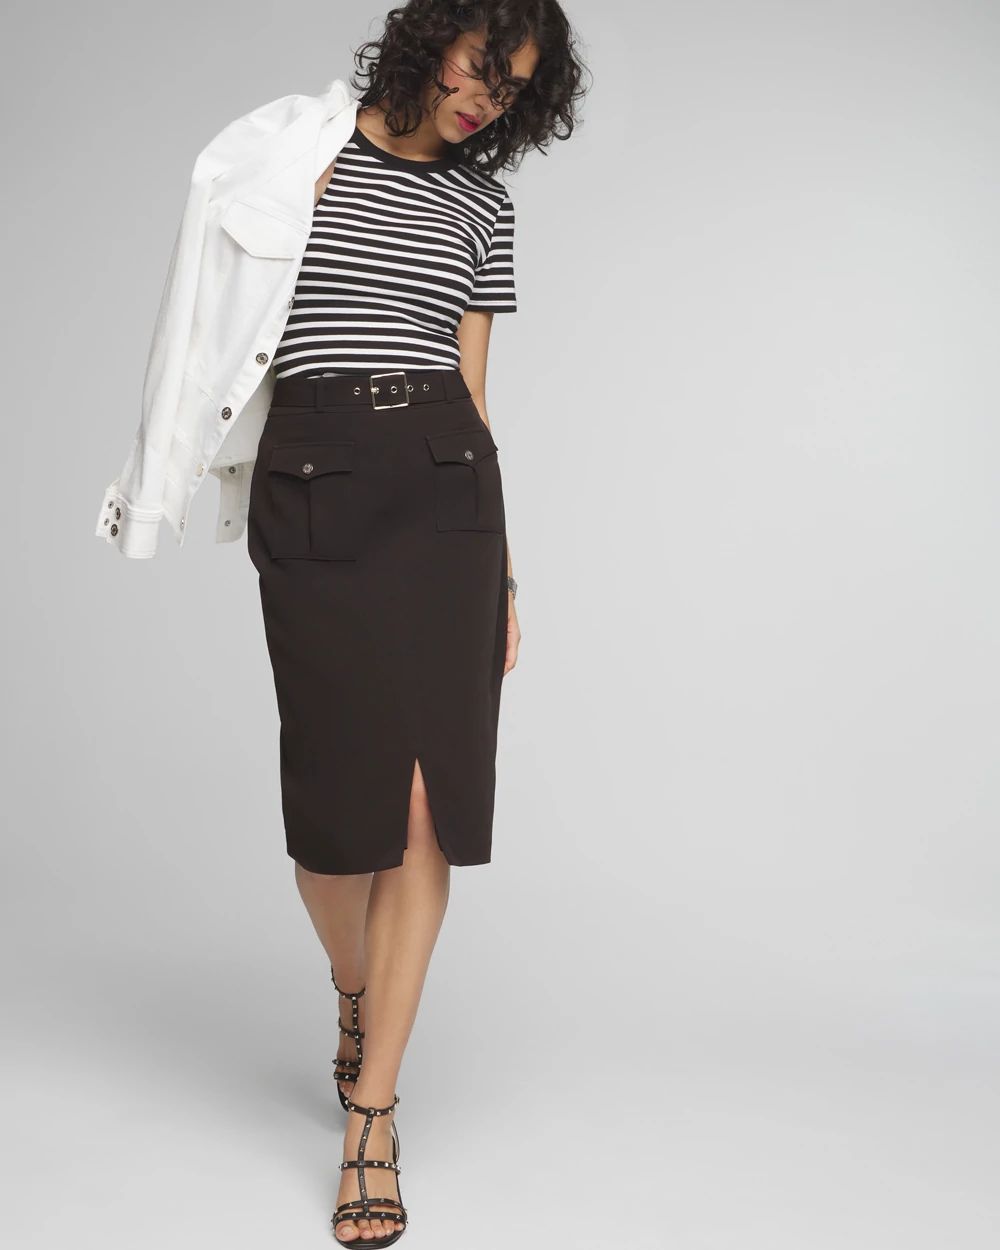 Cargo Pocket Midi Skirt click to view larger image.